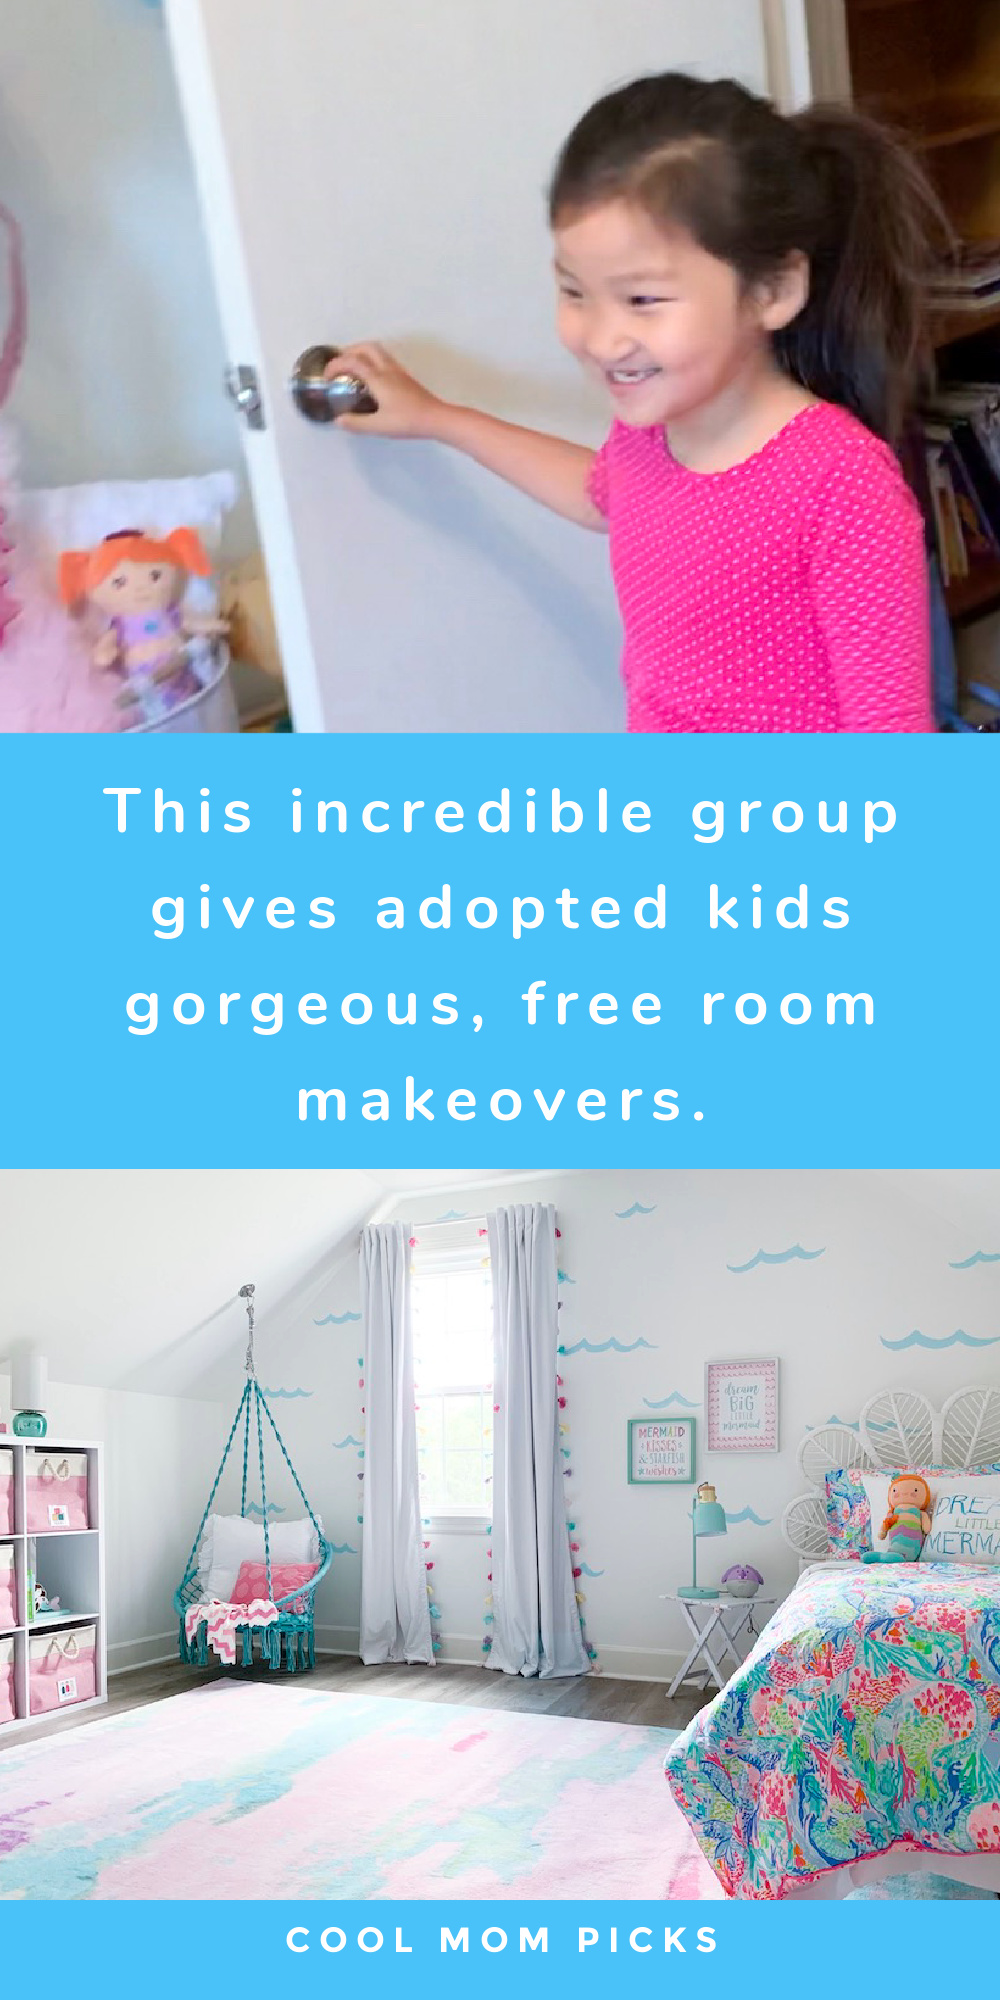 Free room makeovers for adopted kids by Bloom Family Designs.